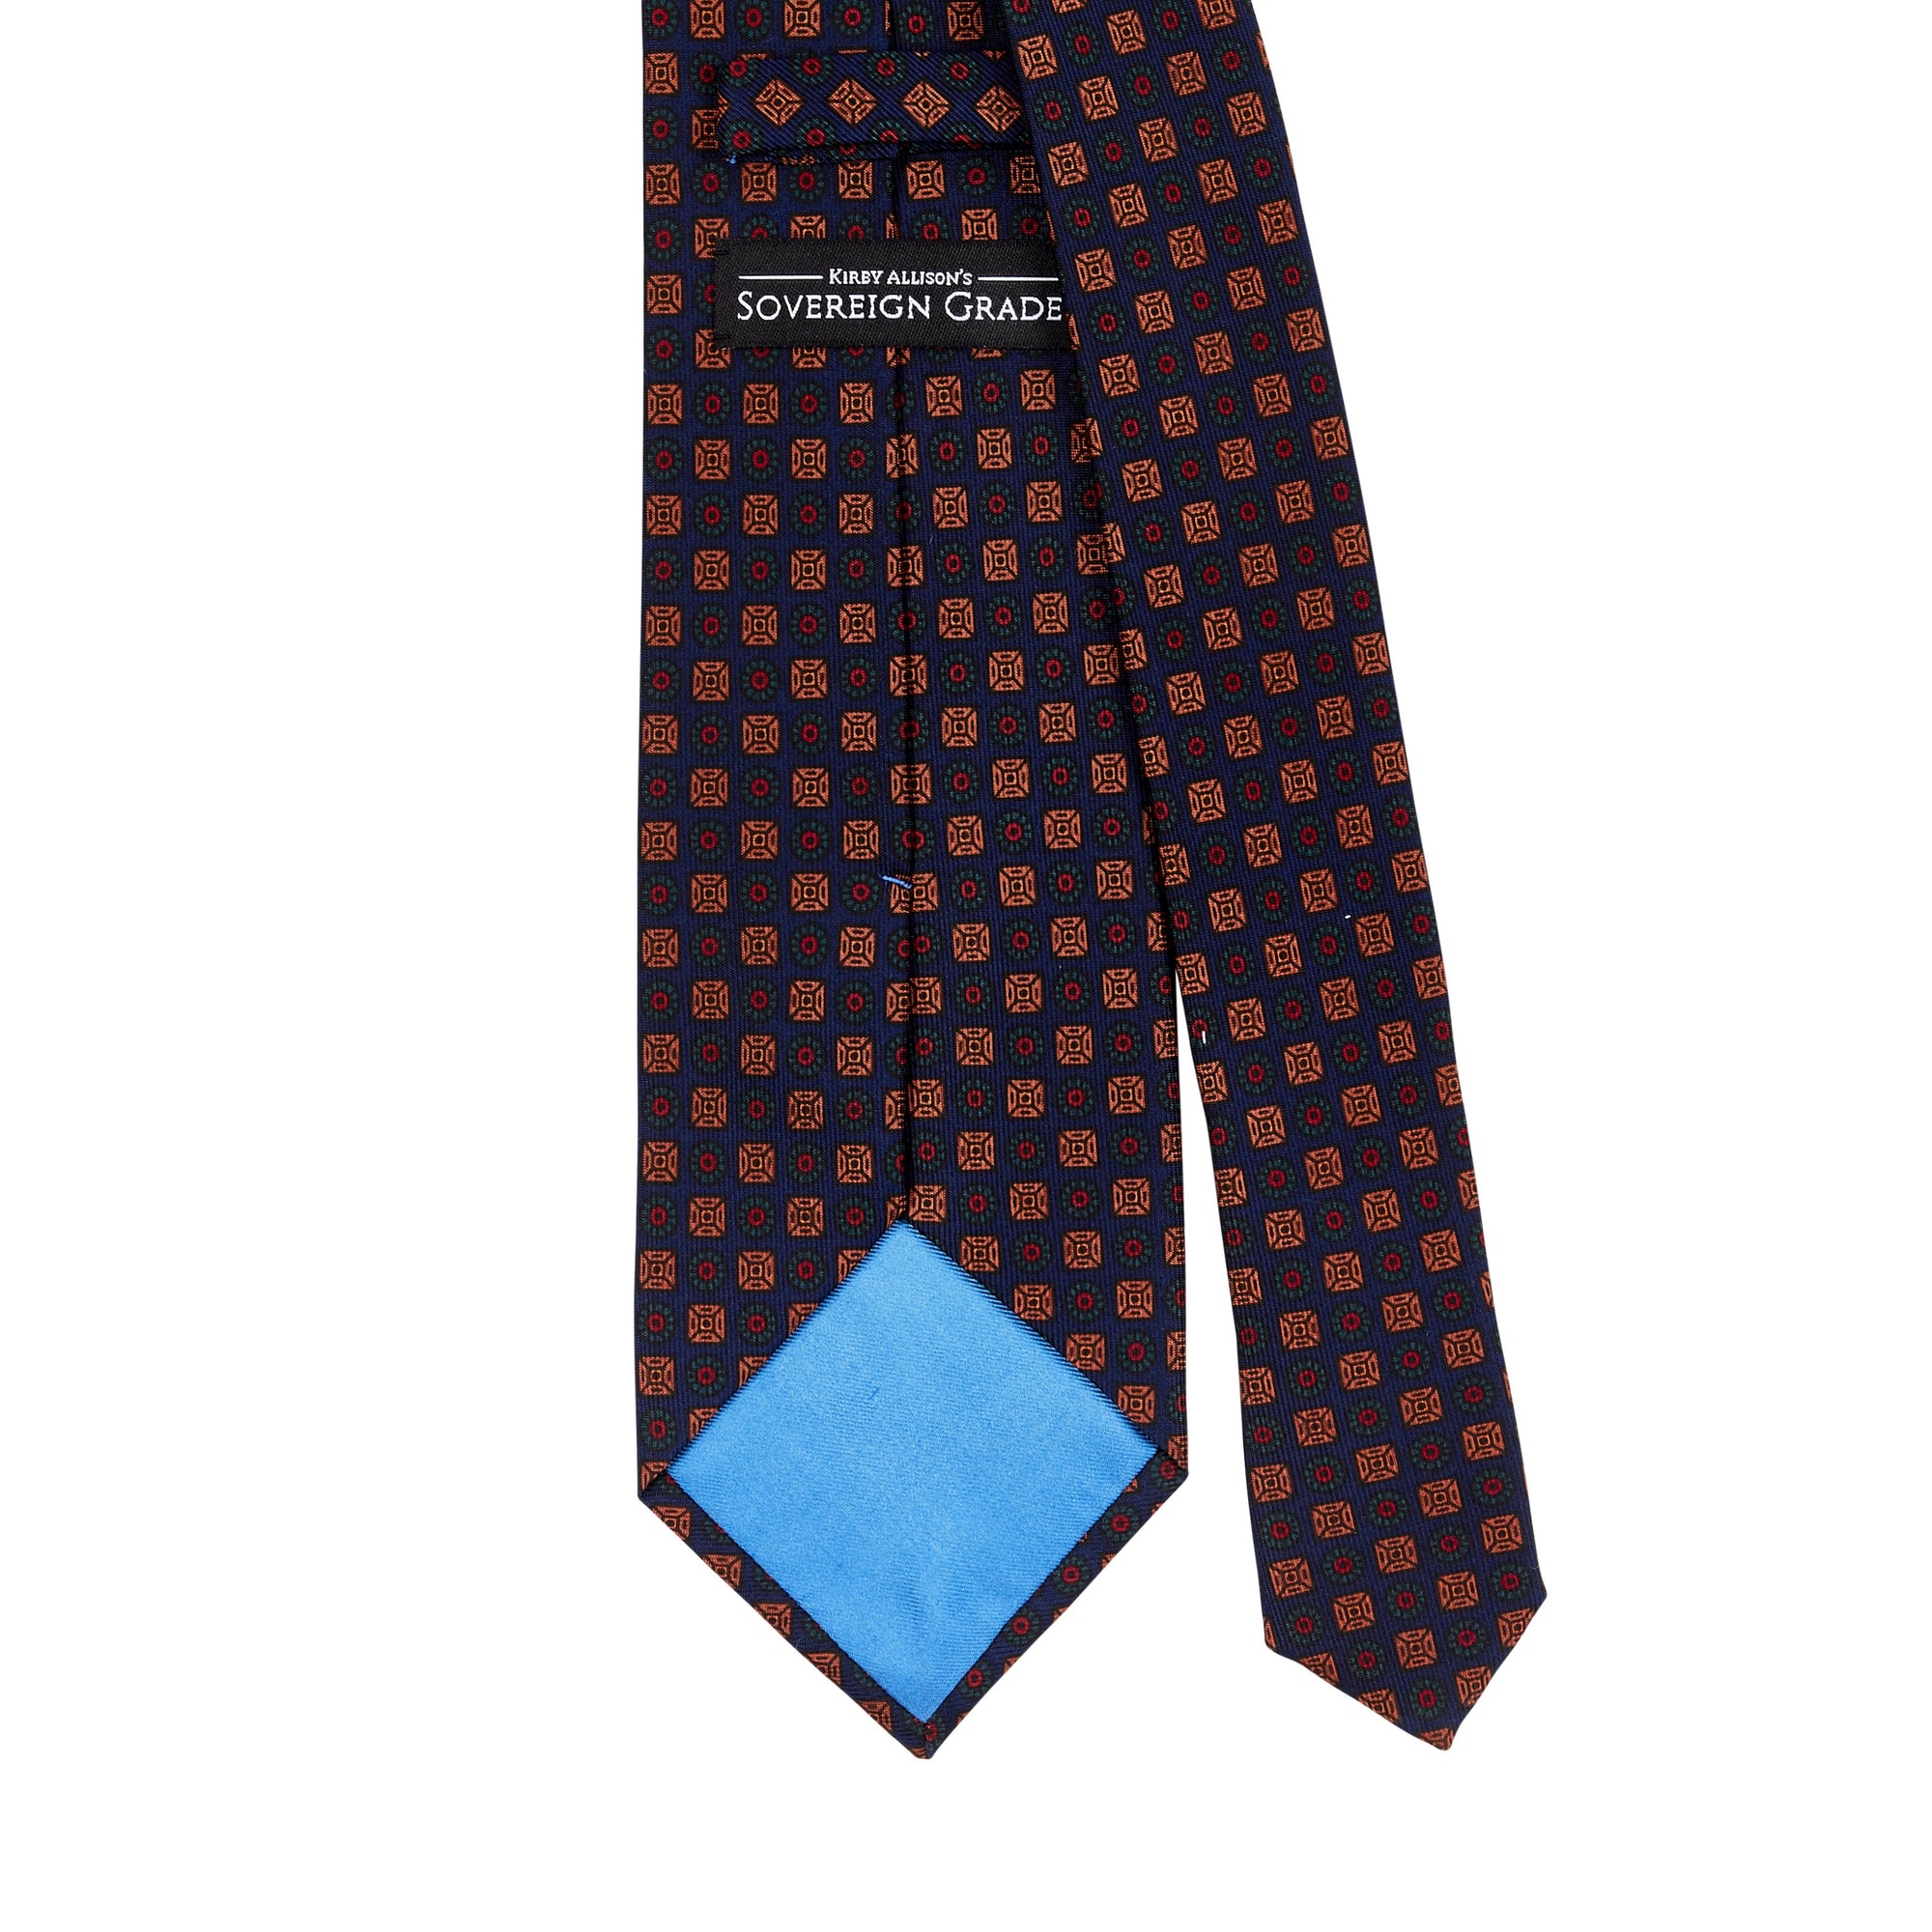 A highest quality Sovereign Grade Dark Navy Ancient Madder necktie by KirbyAllison.com with a blue and orange polka dot pattern.